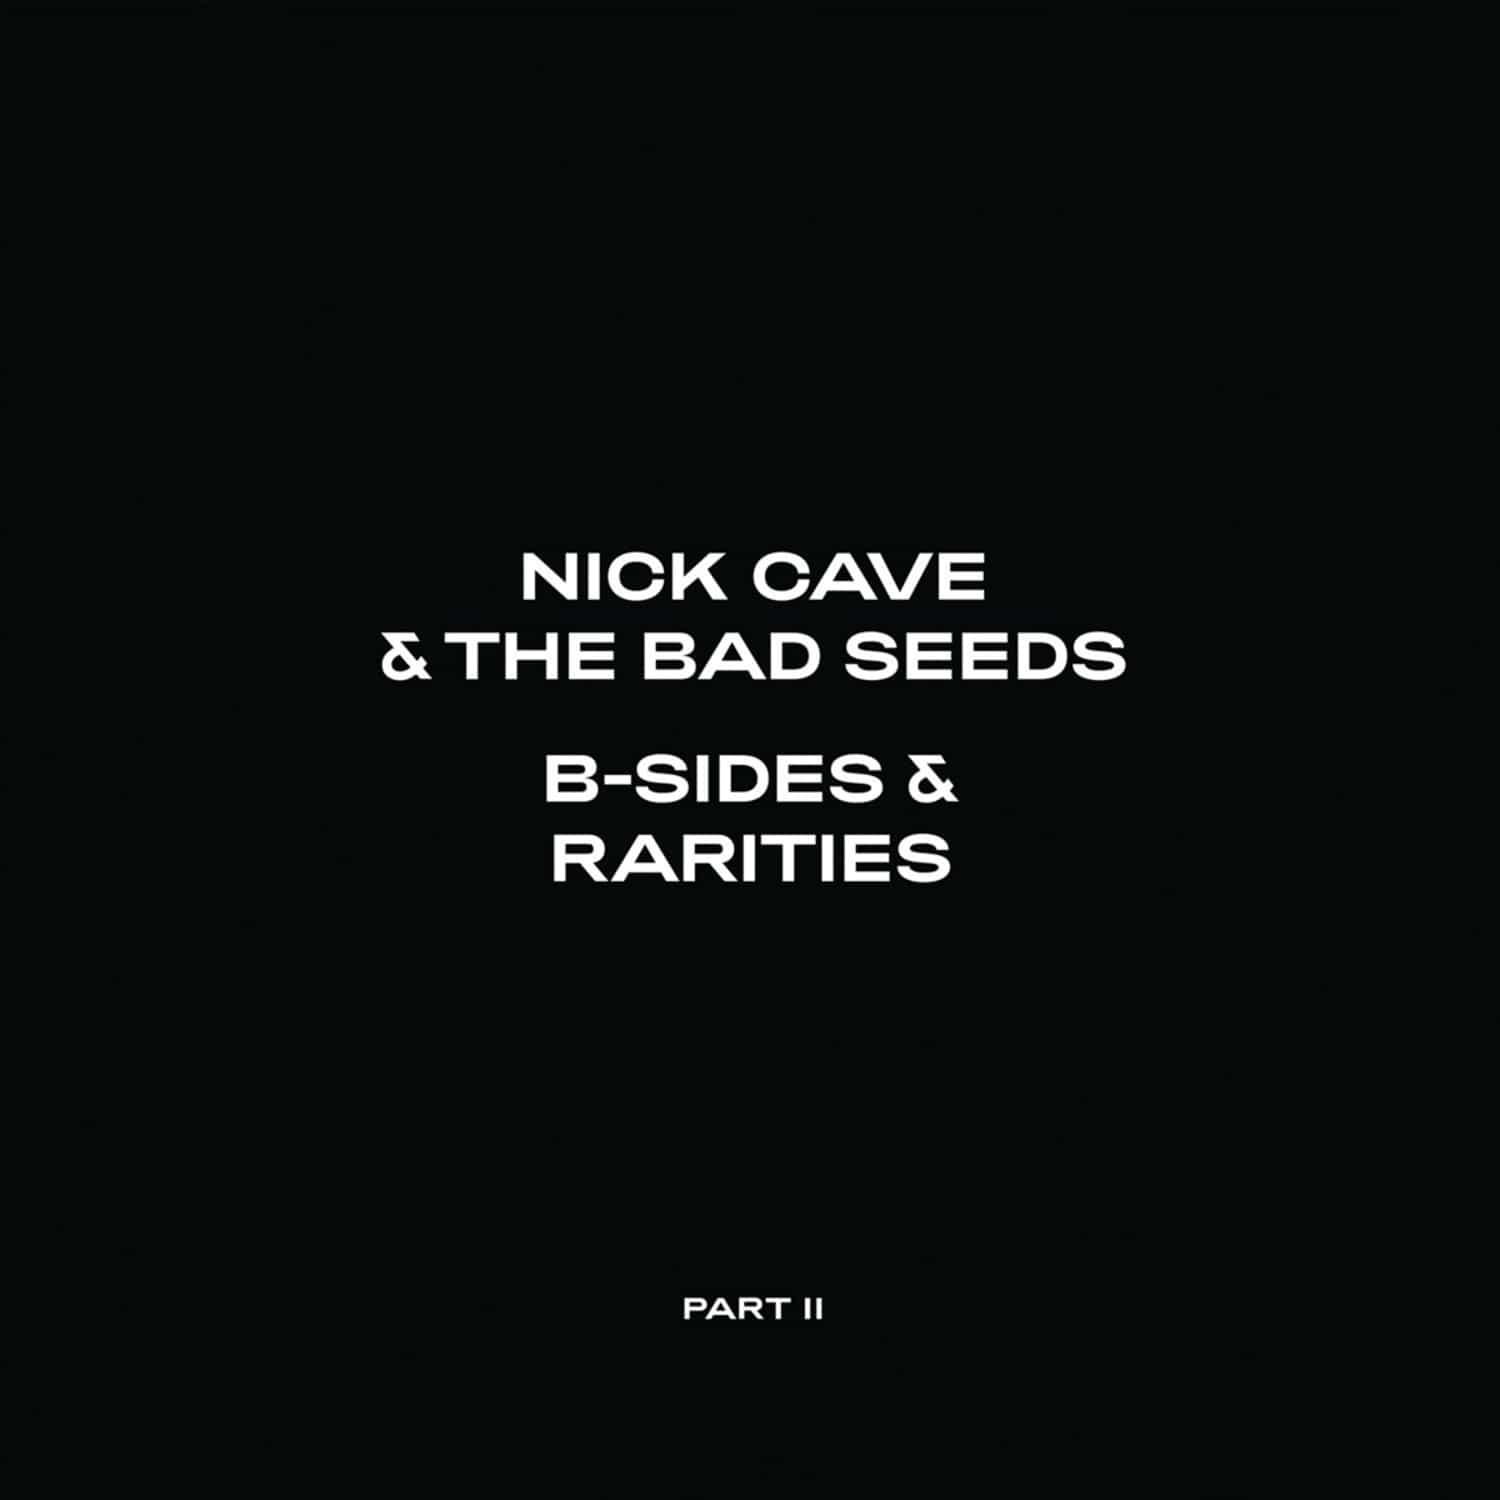 Nick Cave & The Bad Seeds - B-SIDES & RARITIES - PART II 